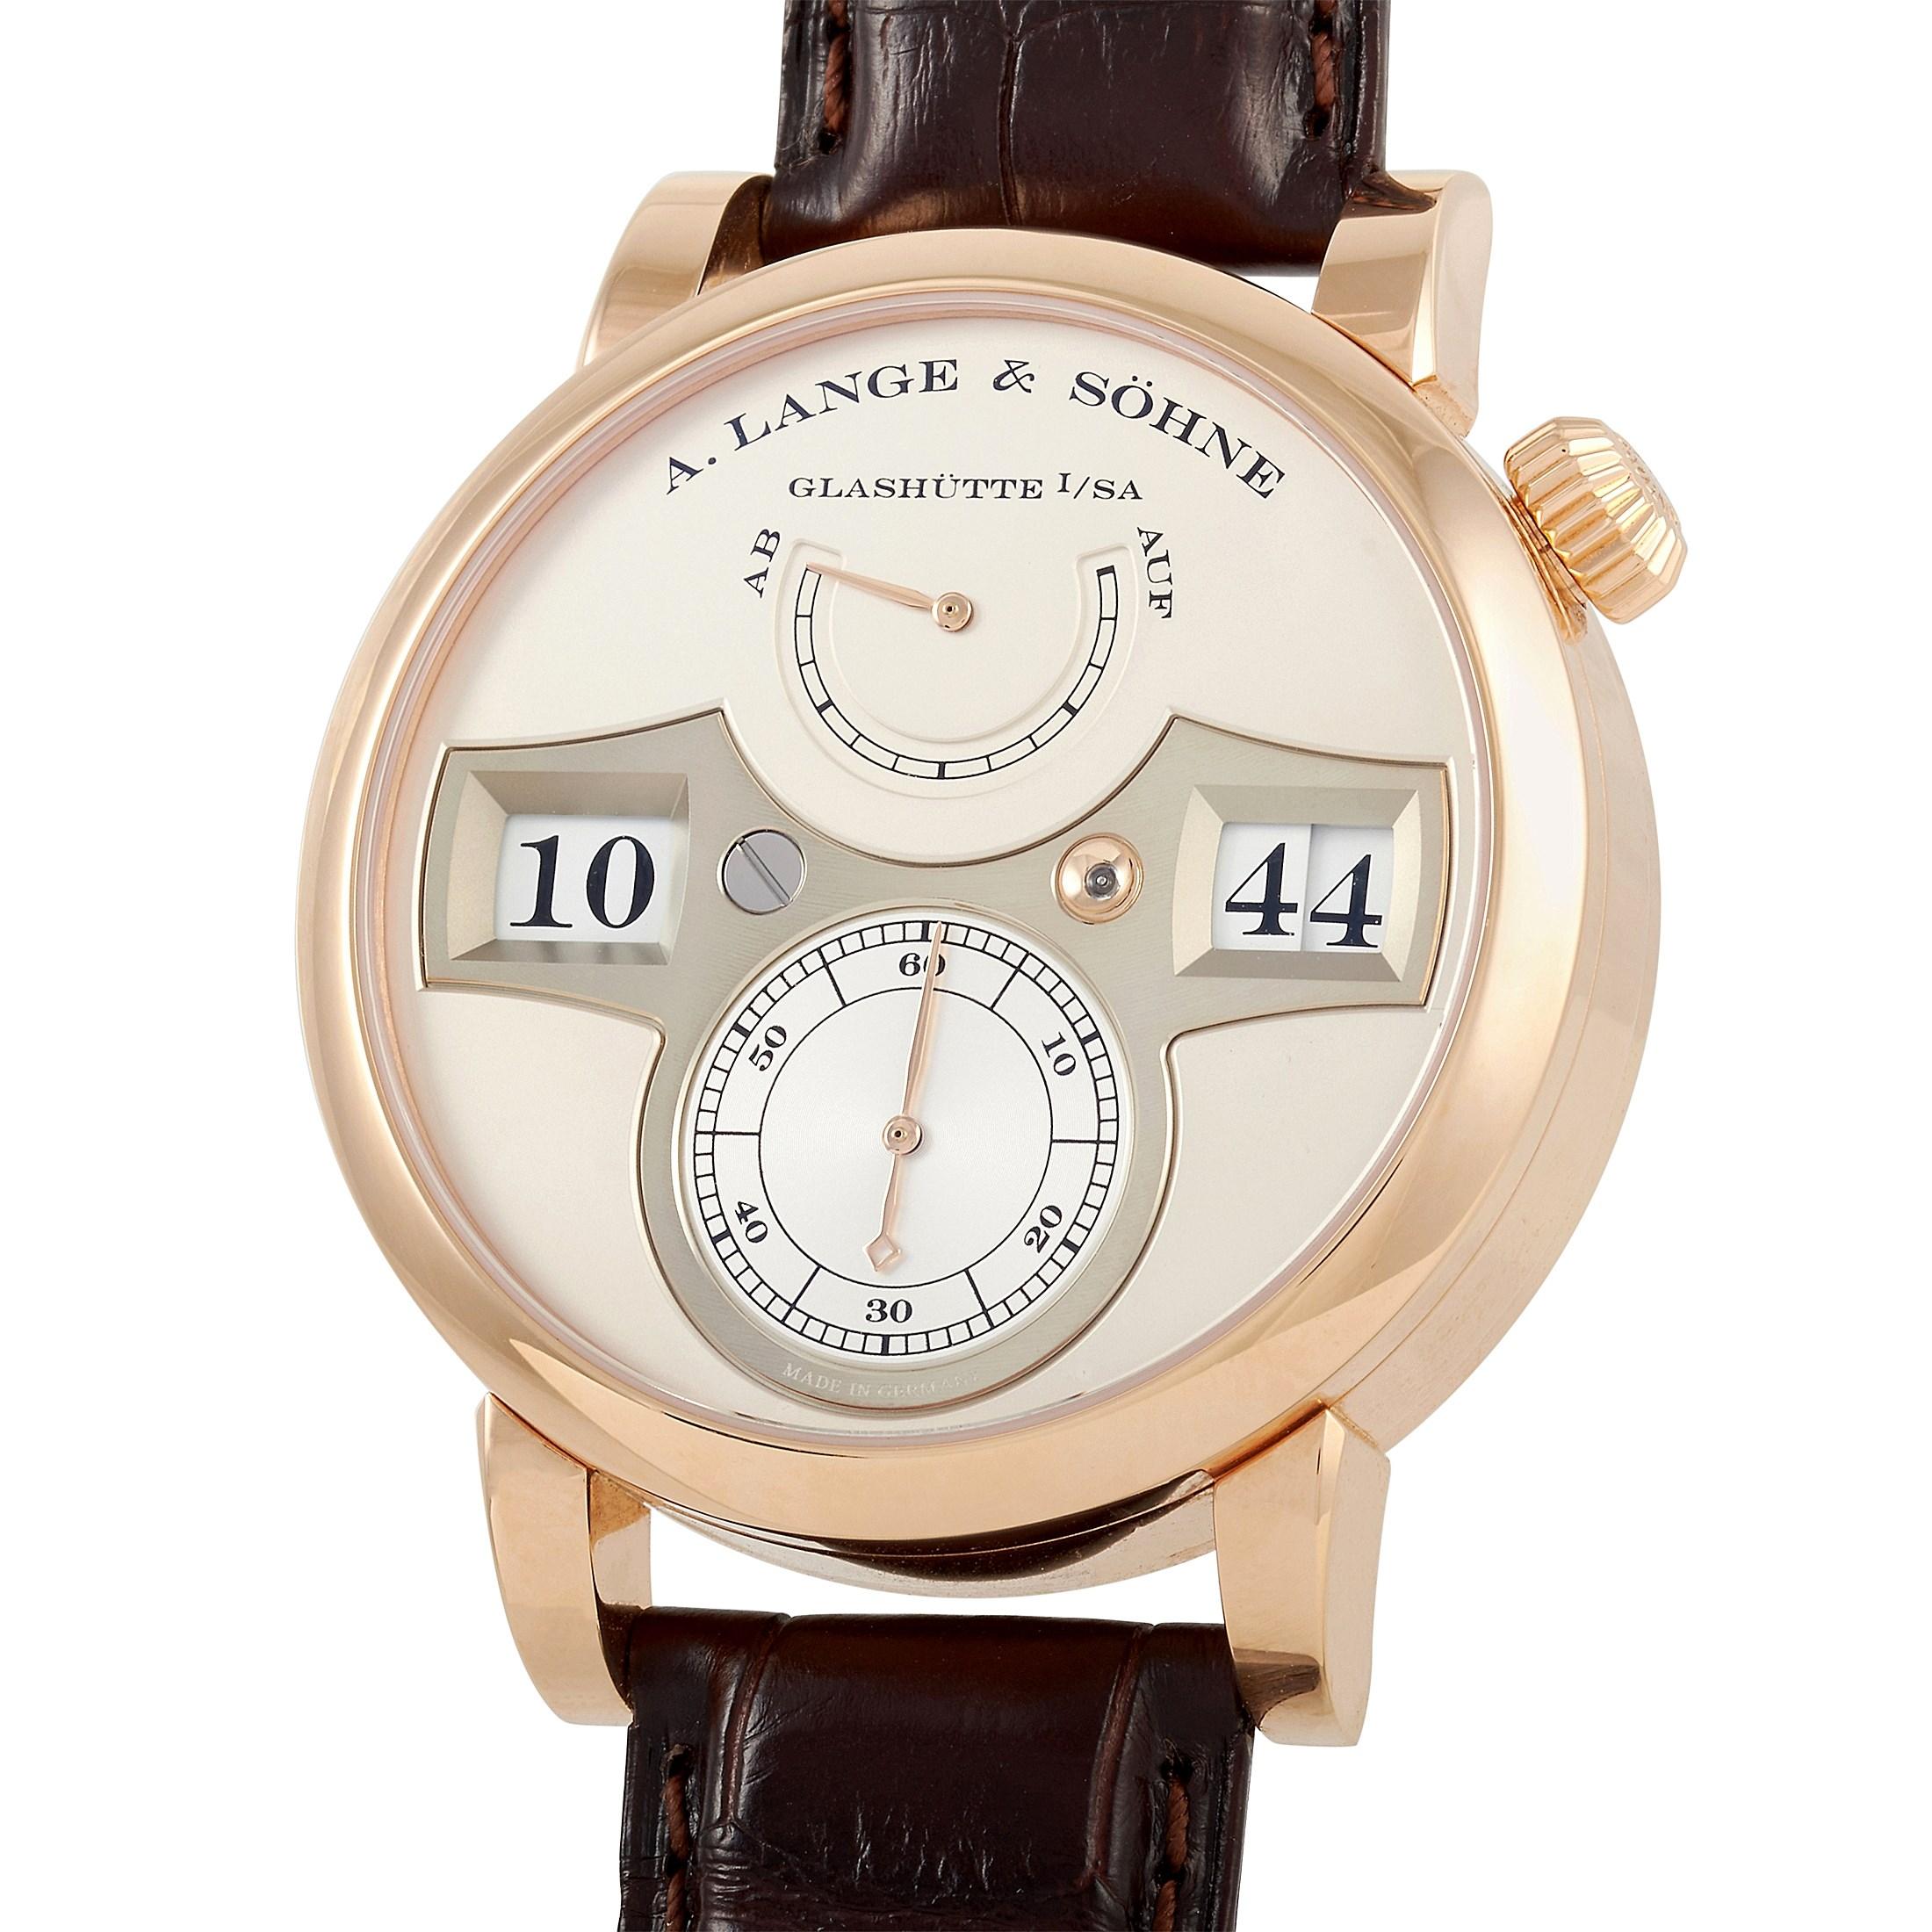 This A. Lange & Sohne Zeitwerk 41.9 mm Rose Gold Watch, reference number 140.032, has an 18K rose gold case that measures 41.9 mm in diameter. The case is presented on a deep brown alligator leather strap with tang closure. The open case back offers